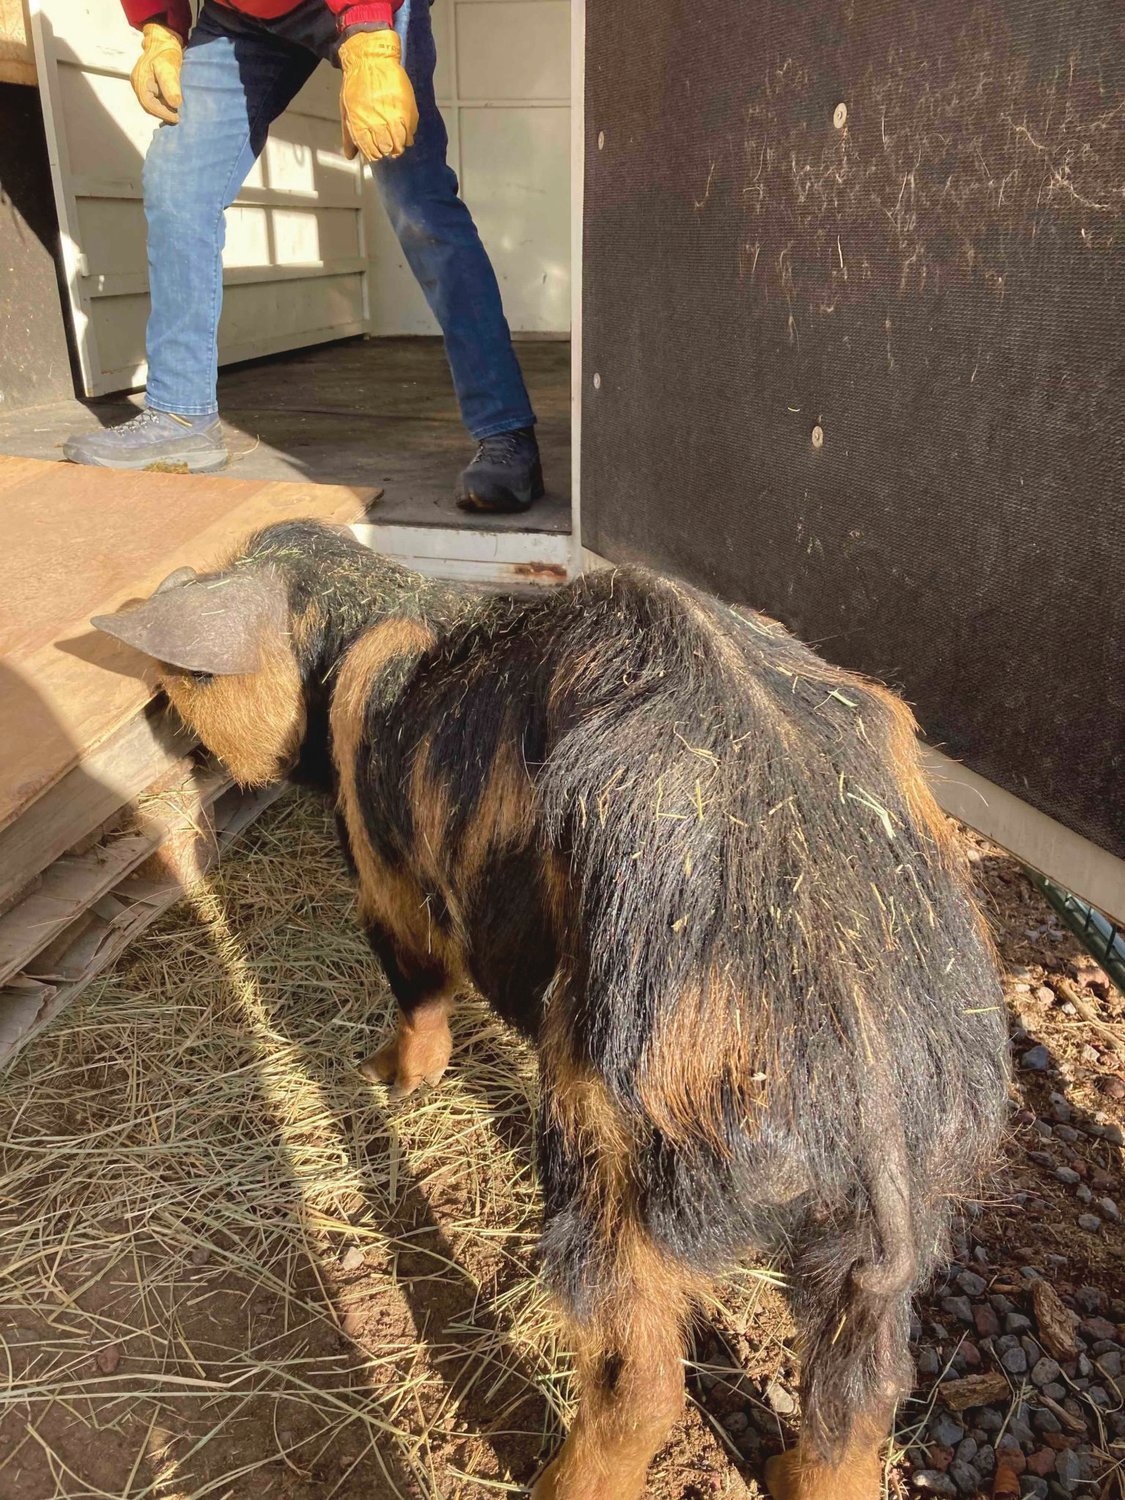 Heartwood Haven, an animal sanctuary in Roy, recently rescued dozens of pigs following an animal cruelty case in Oregon.